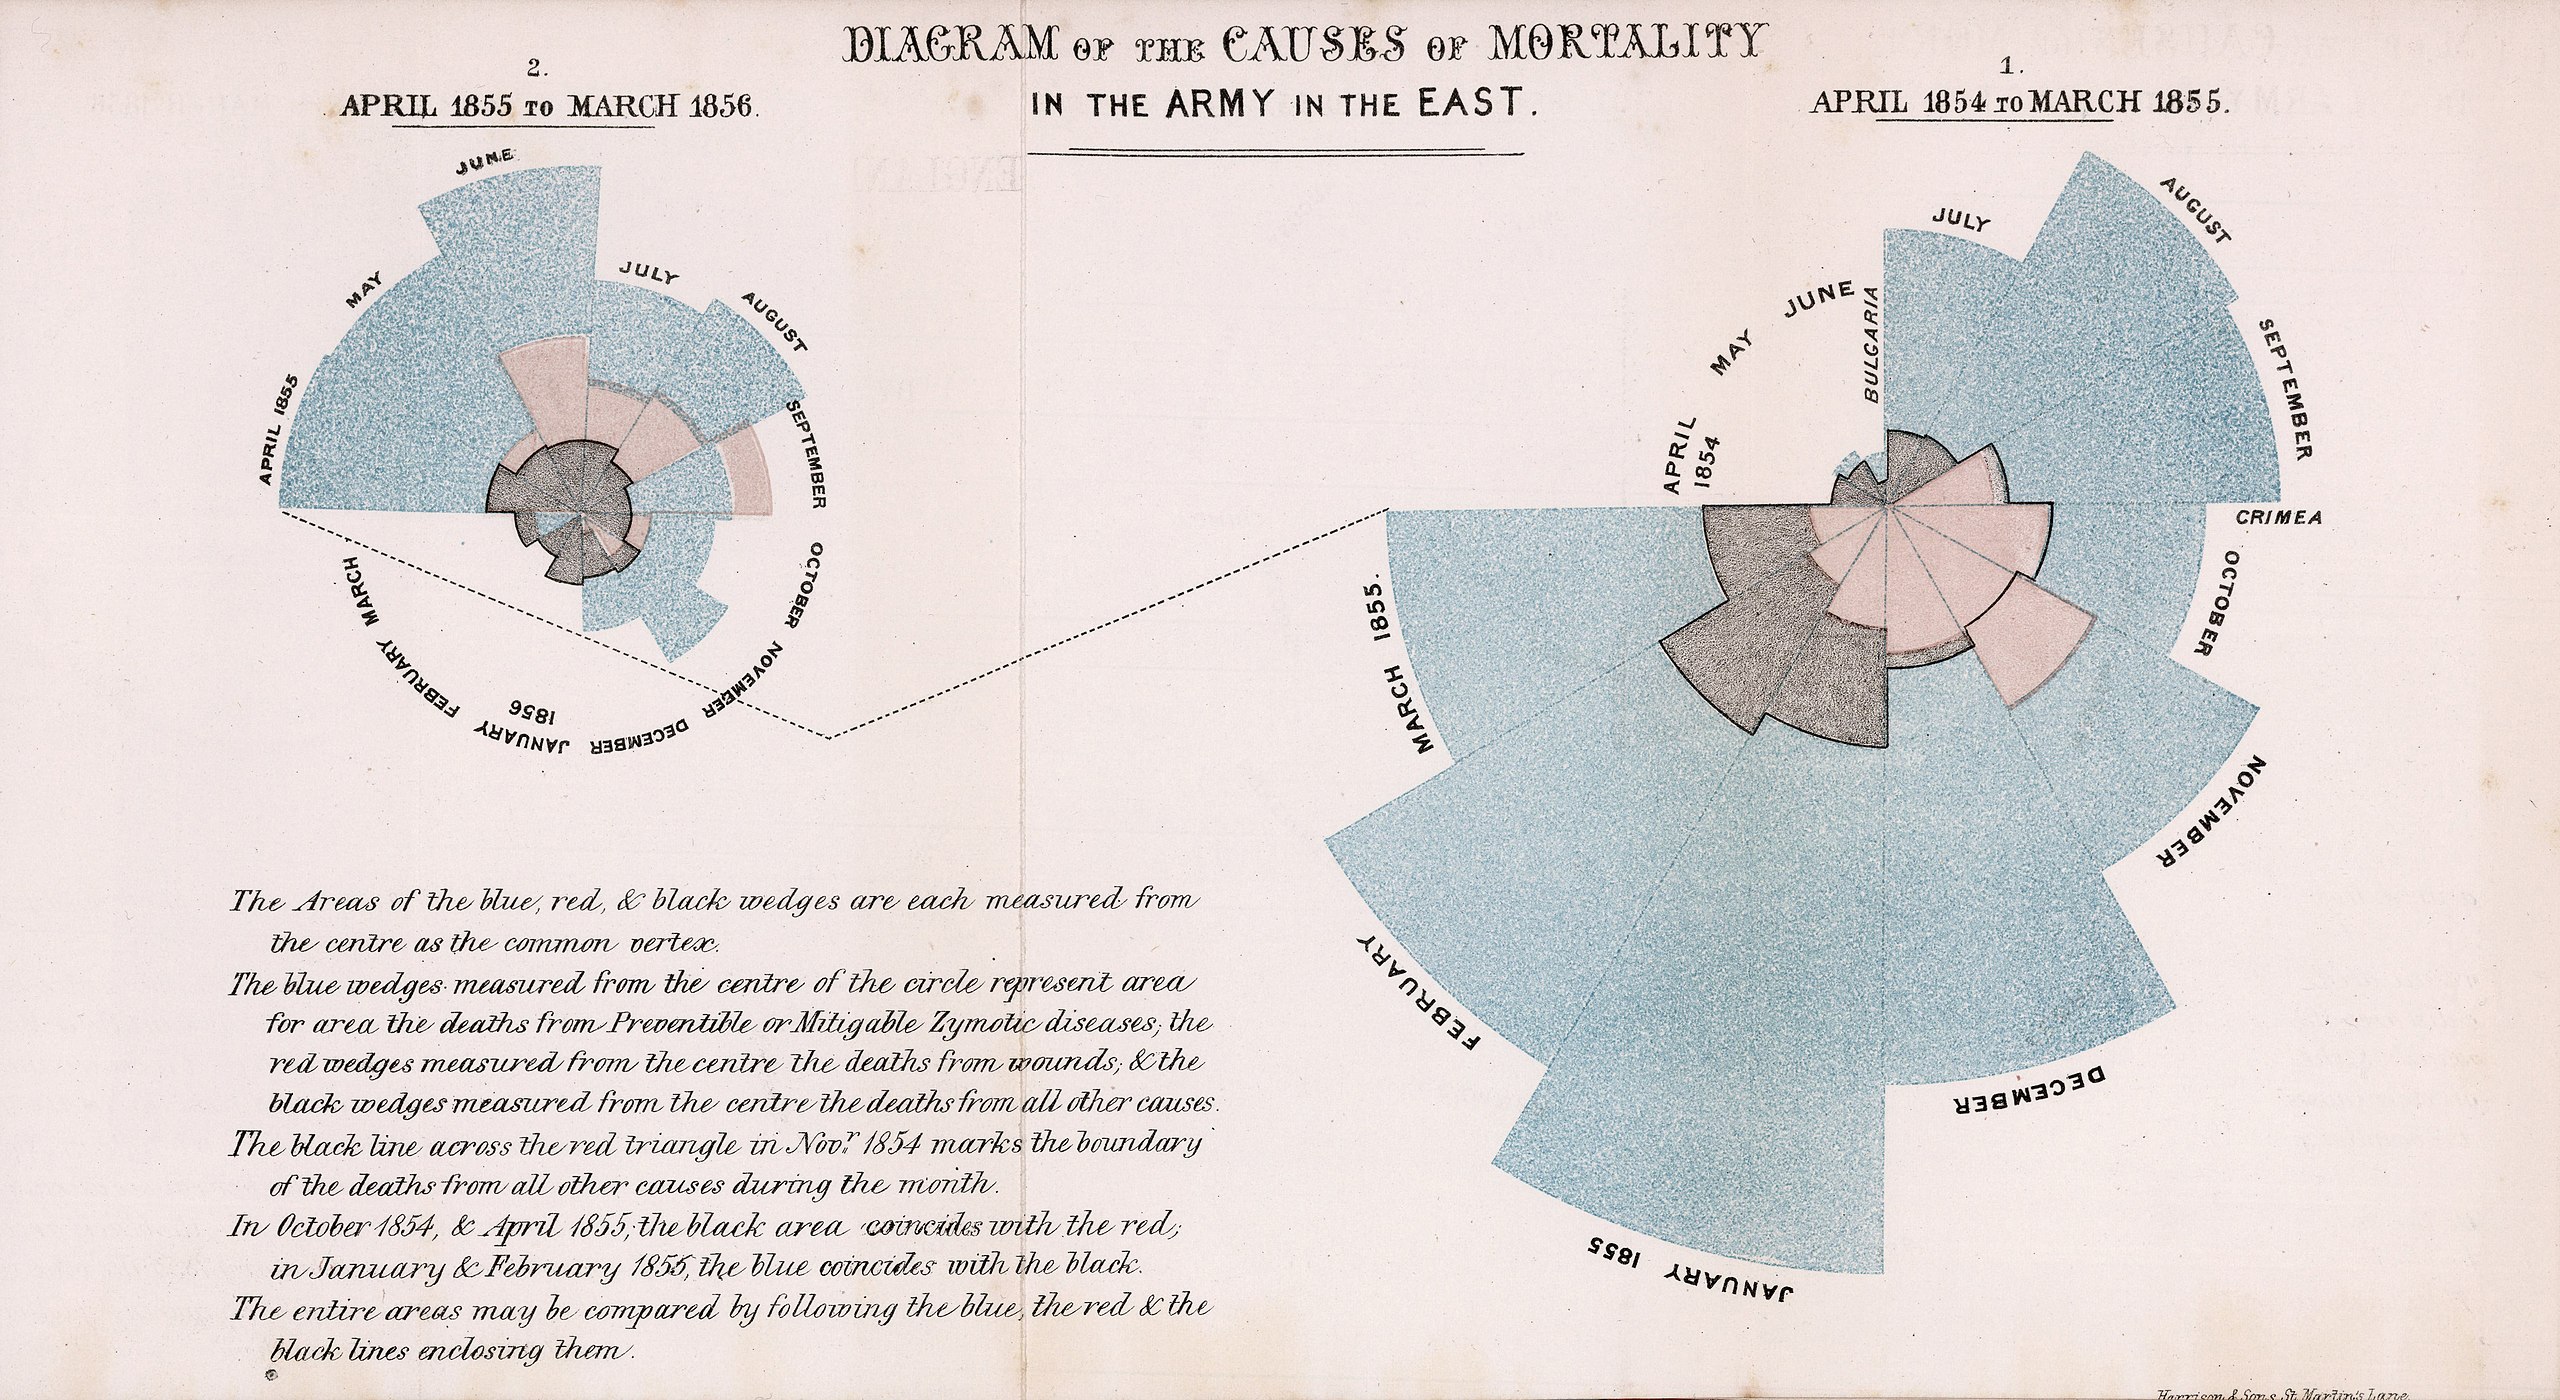 A diagram that shows two pinwheel-like coxcomb charts, which depict preventable deaths, deaths from wounds, and deaths from other causes, each represented in blue, red, or black, respectively, for a year. The chart on the left, marking months between April 1855 and March 1856, is half the size of the chart on the right, which shows Nightingale’s different categorizations of deaths from April of 1854 to March 1855.